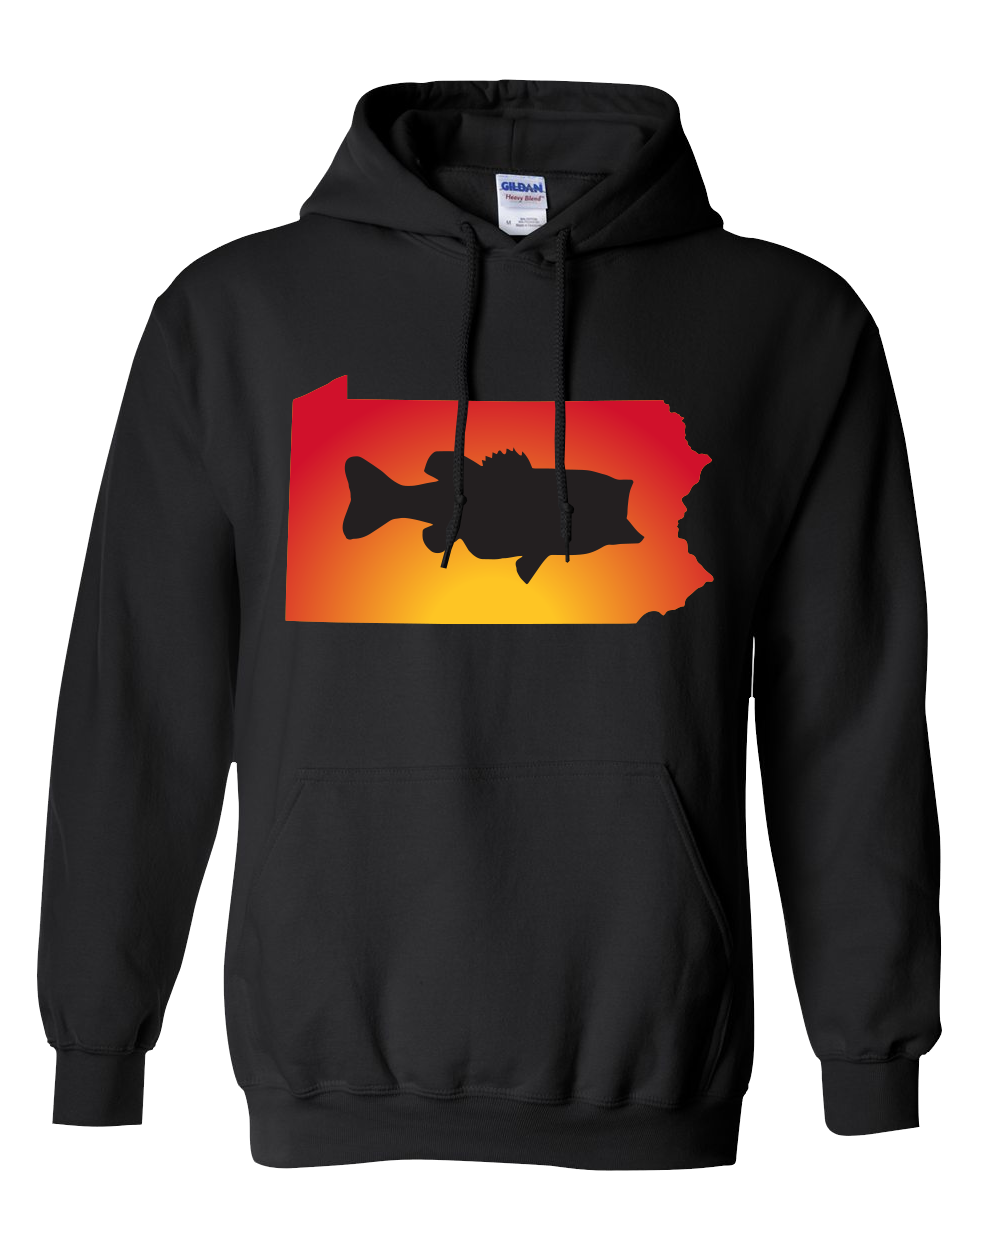 Pullover Hooded Sweatshirt Pennsylvania Black Large Mouth Bass Vibrant Design High Quality Tight Knit Ring Spun Low Maintenance Cotton Printed With The Newest Available Color Transfer Technology